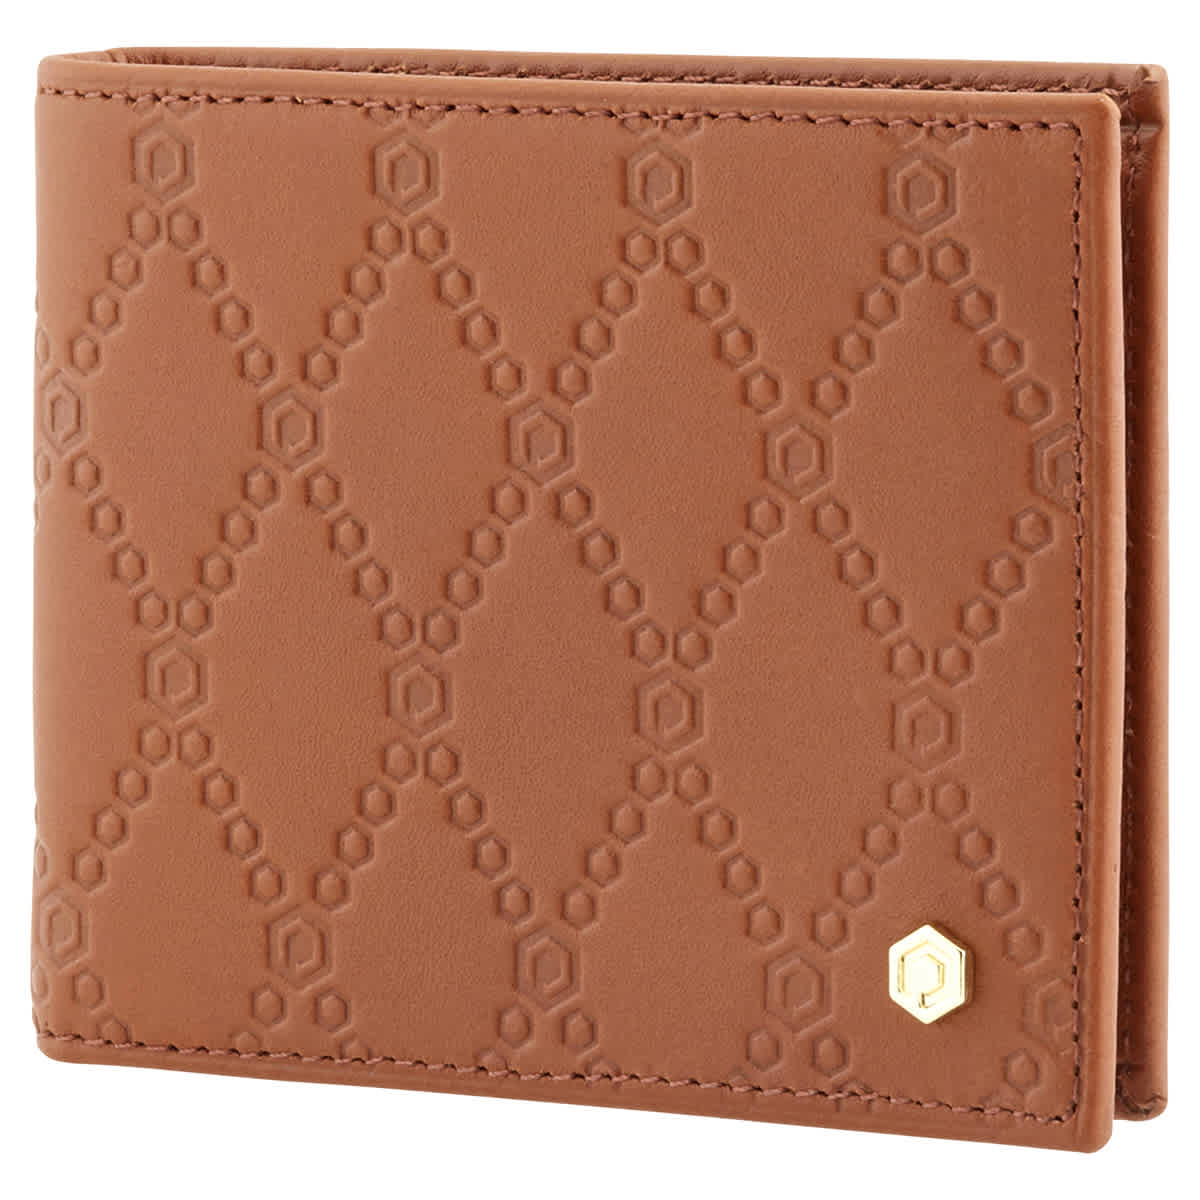 Picasso And Co Slim Leather Wallet- Tan